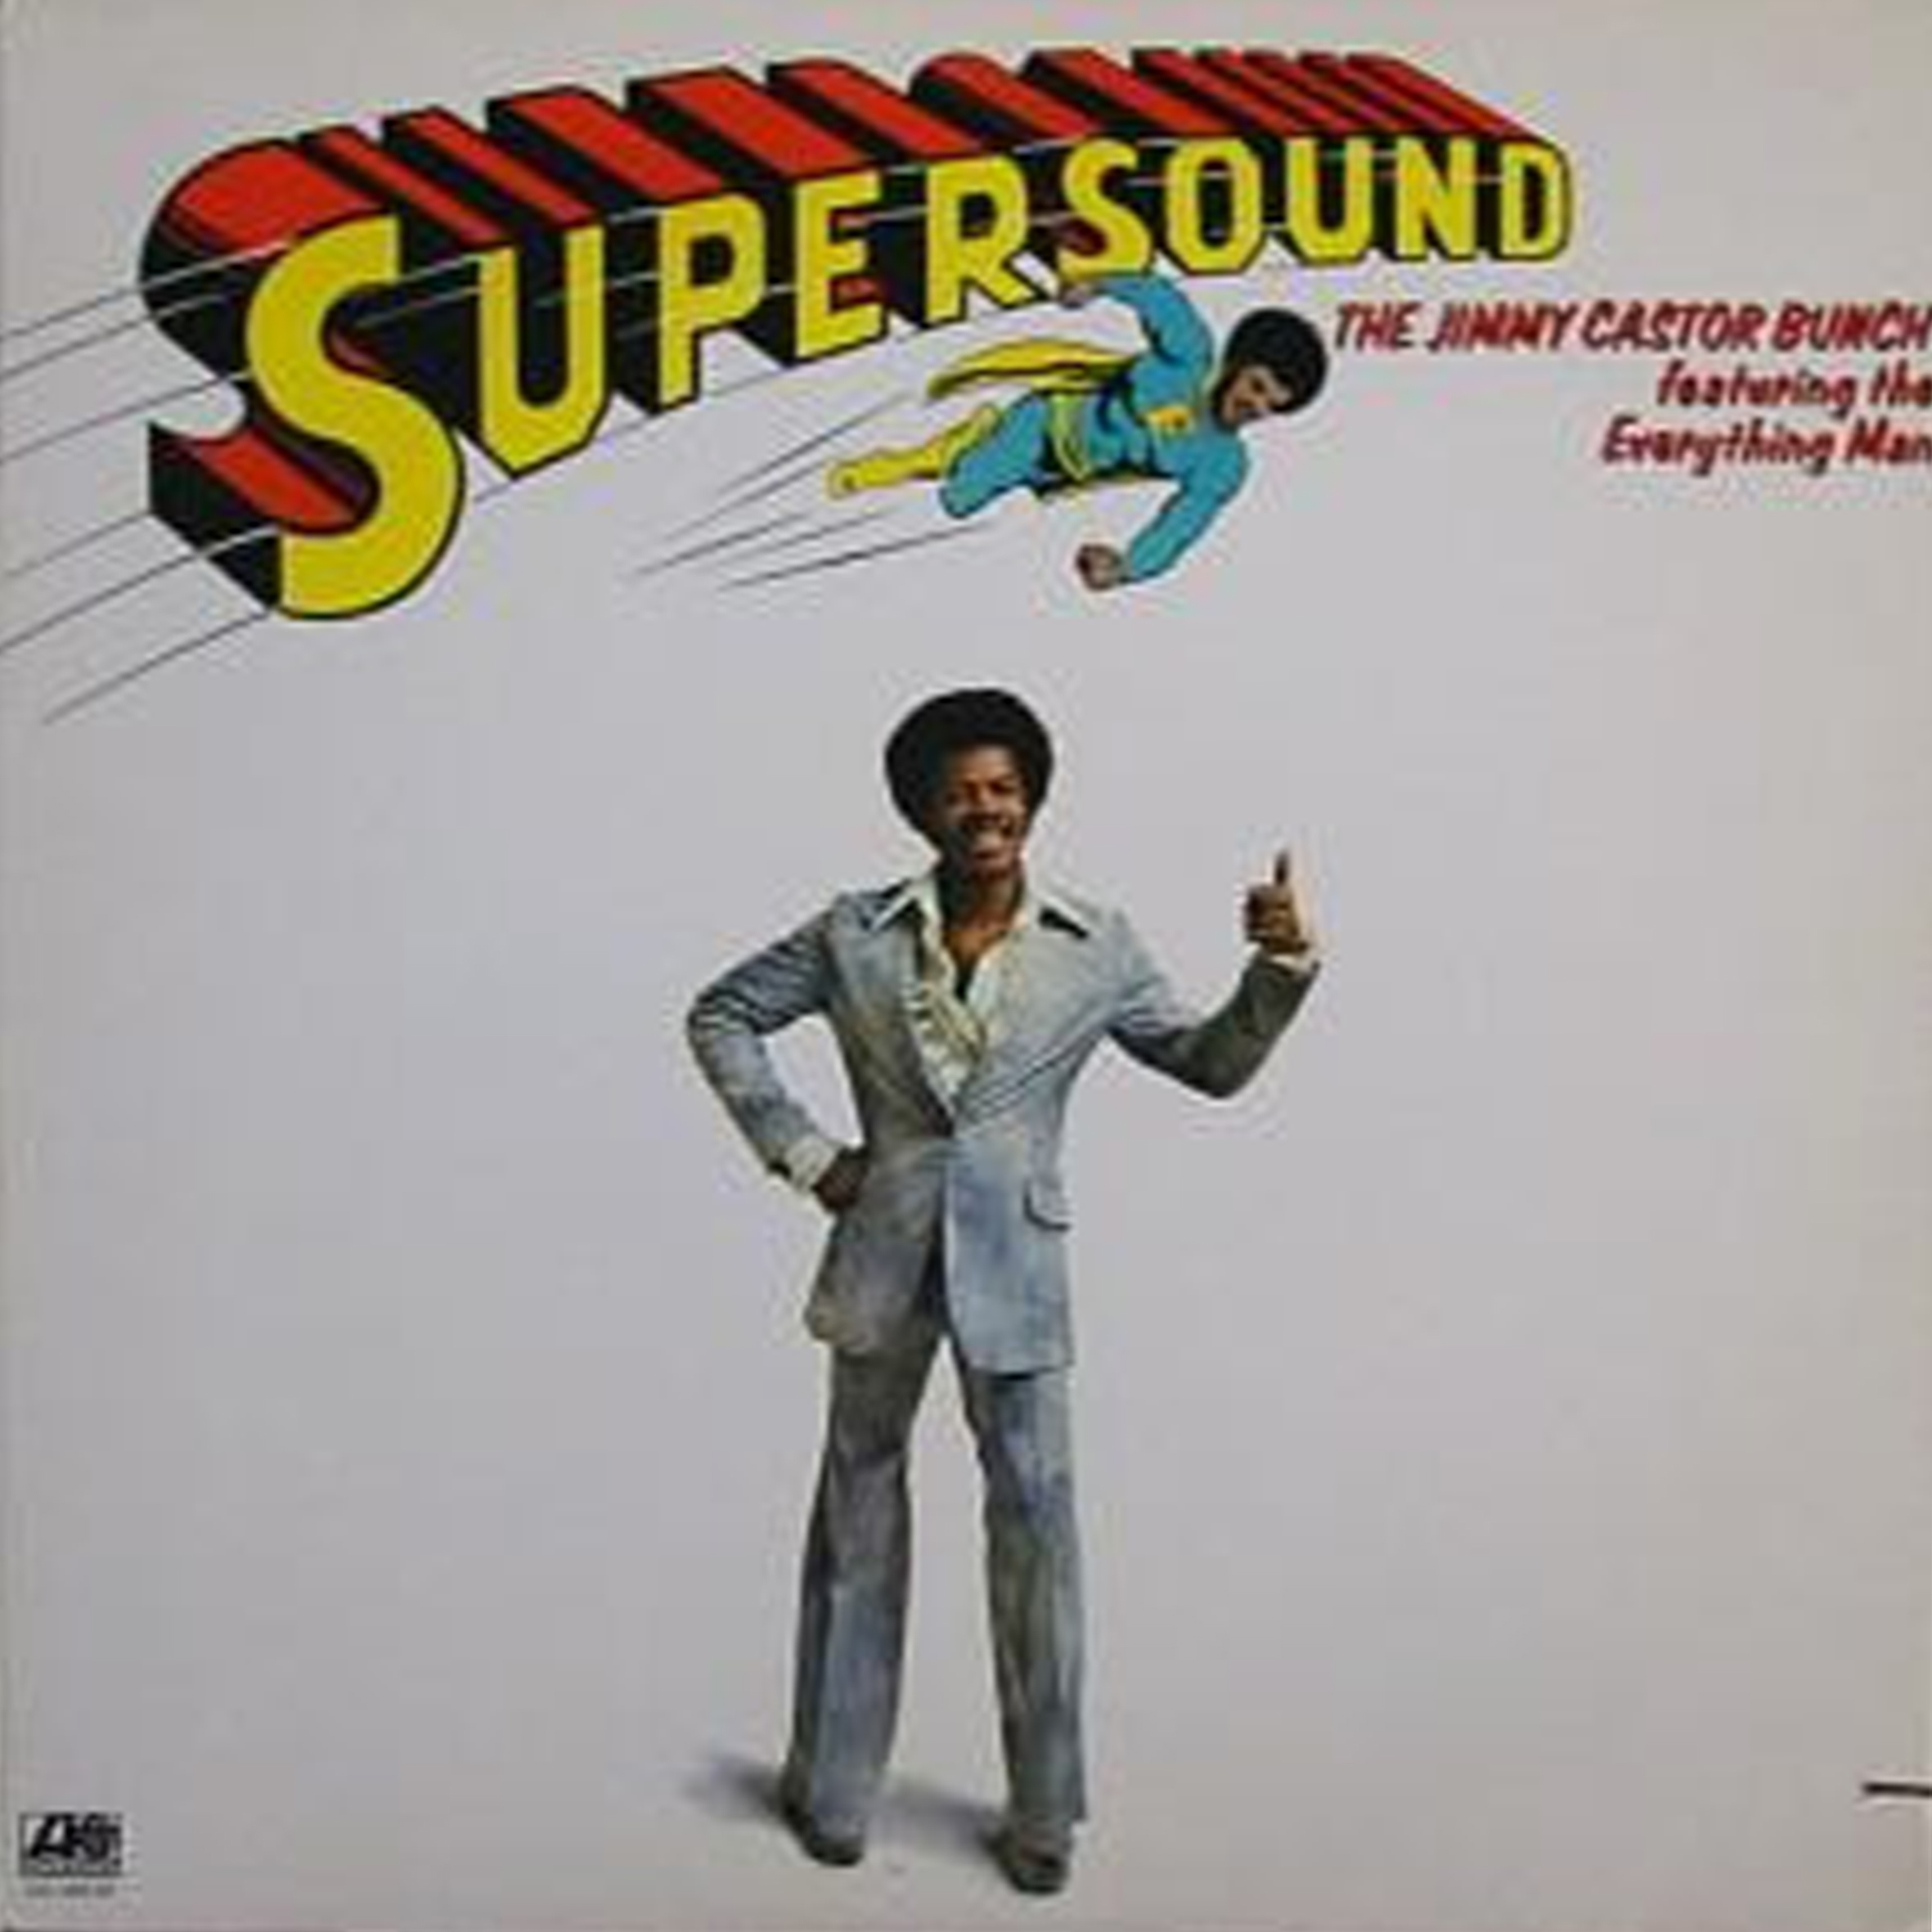 Vinil - Jimmy Castor Bunch The Featuring The Everything Man - Supersound